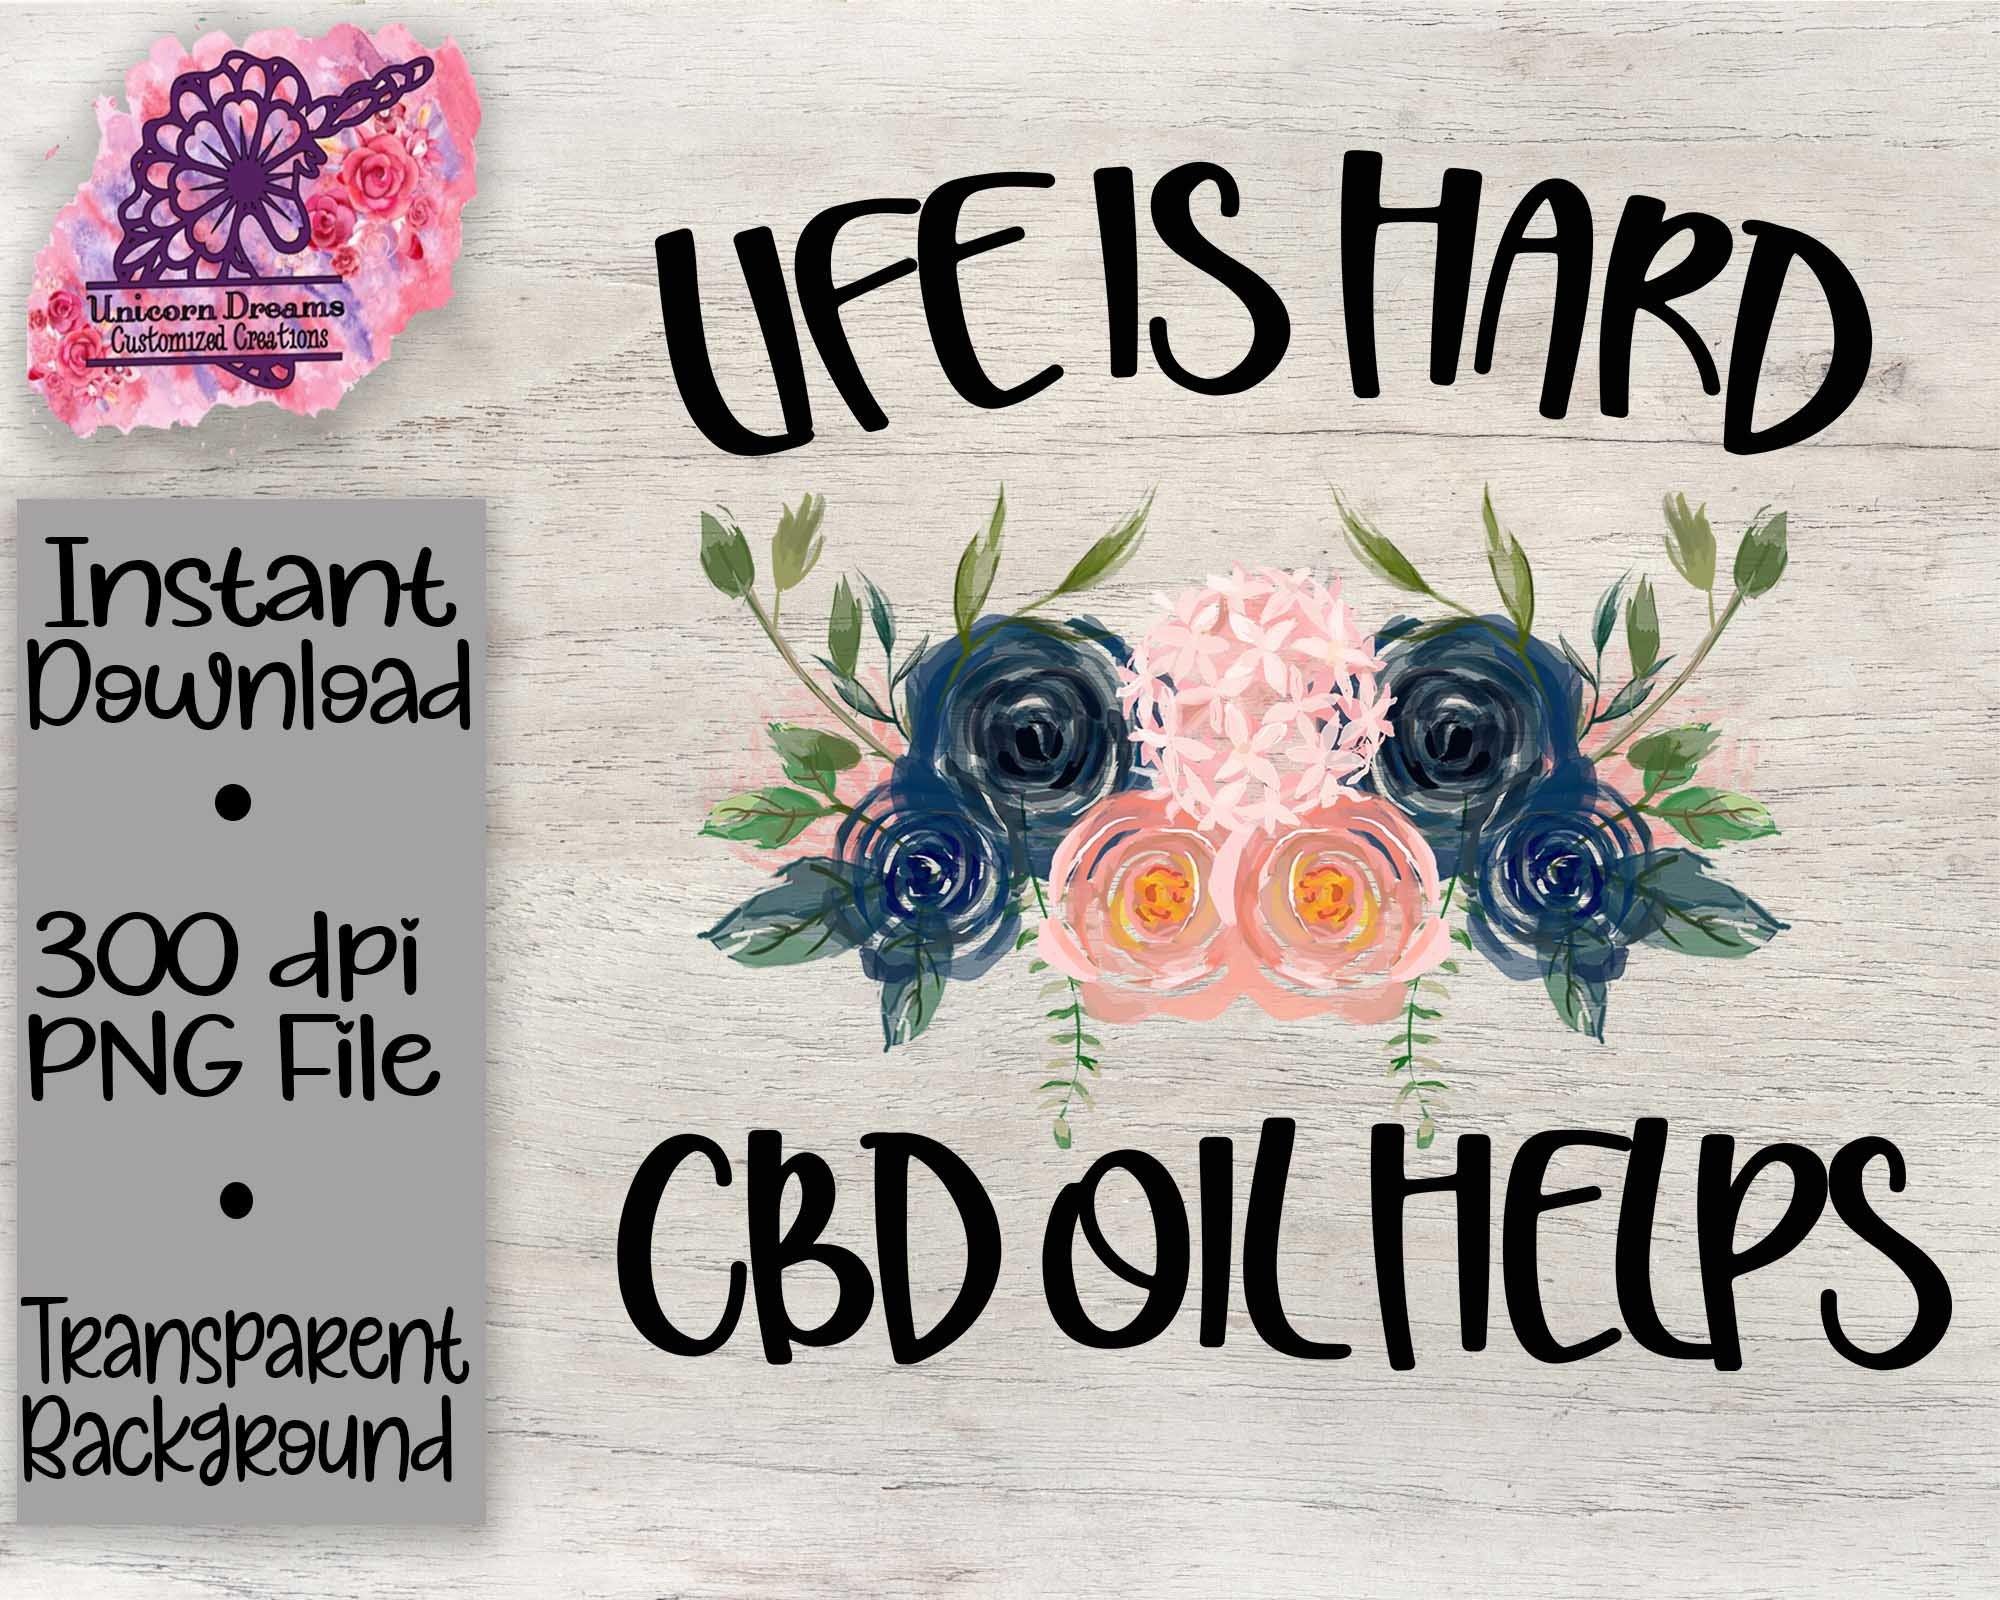 Life is Hard CBD Oil Helps PNG Digital Download - Unicorn Dreams Customized Creations